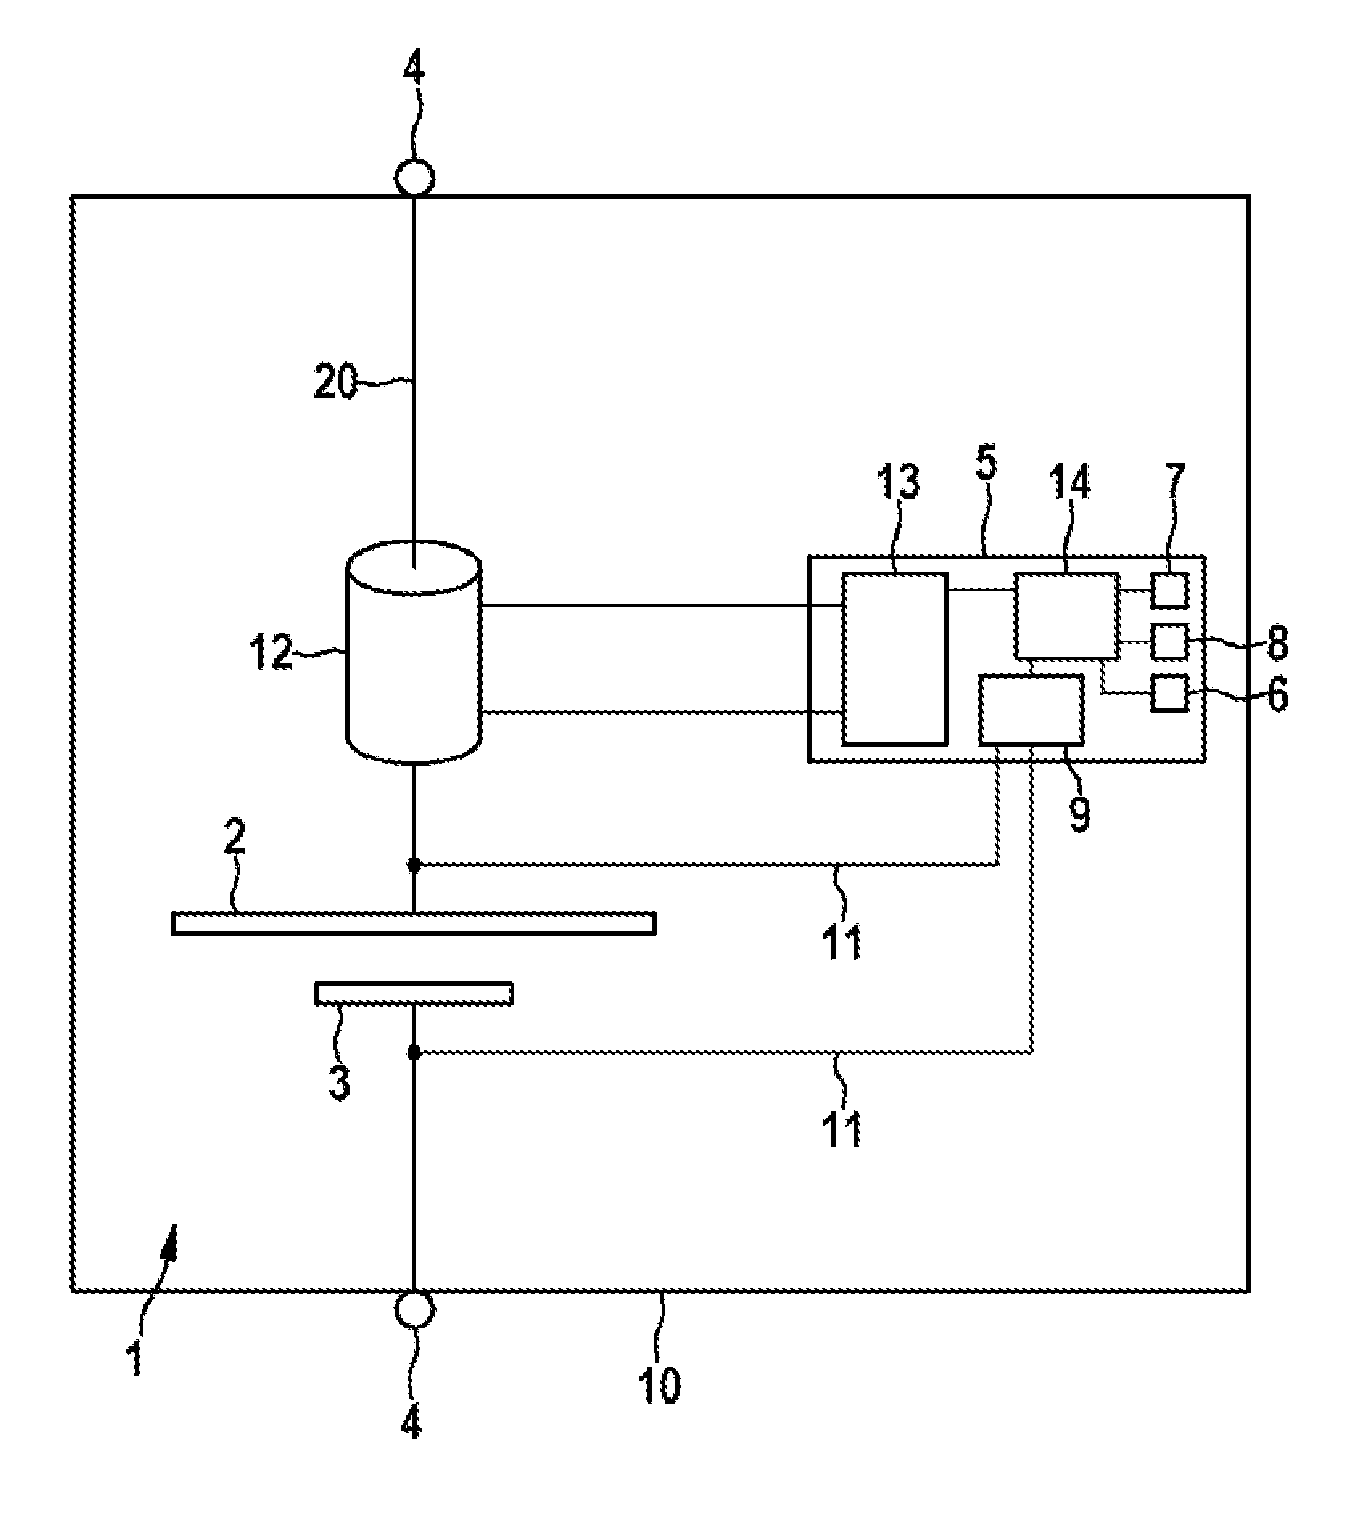 Battery cell comprising a device for monitoring at least one parameter of the battery cell